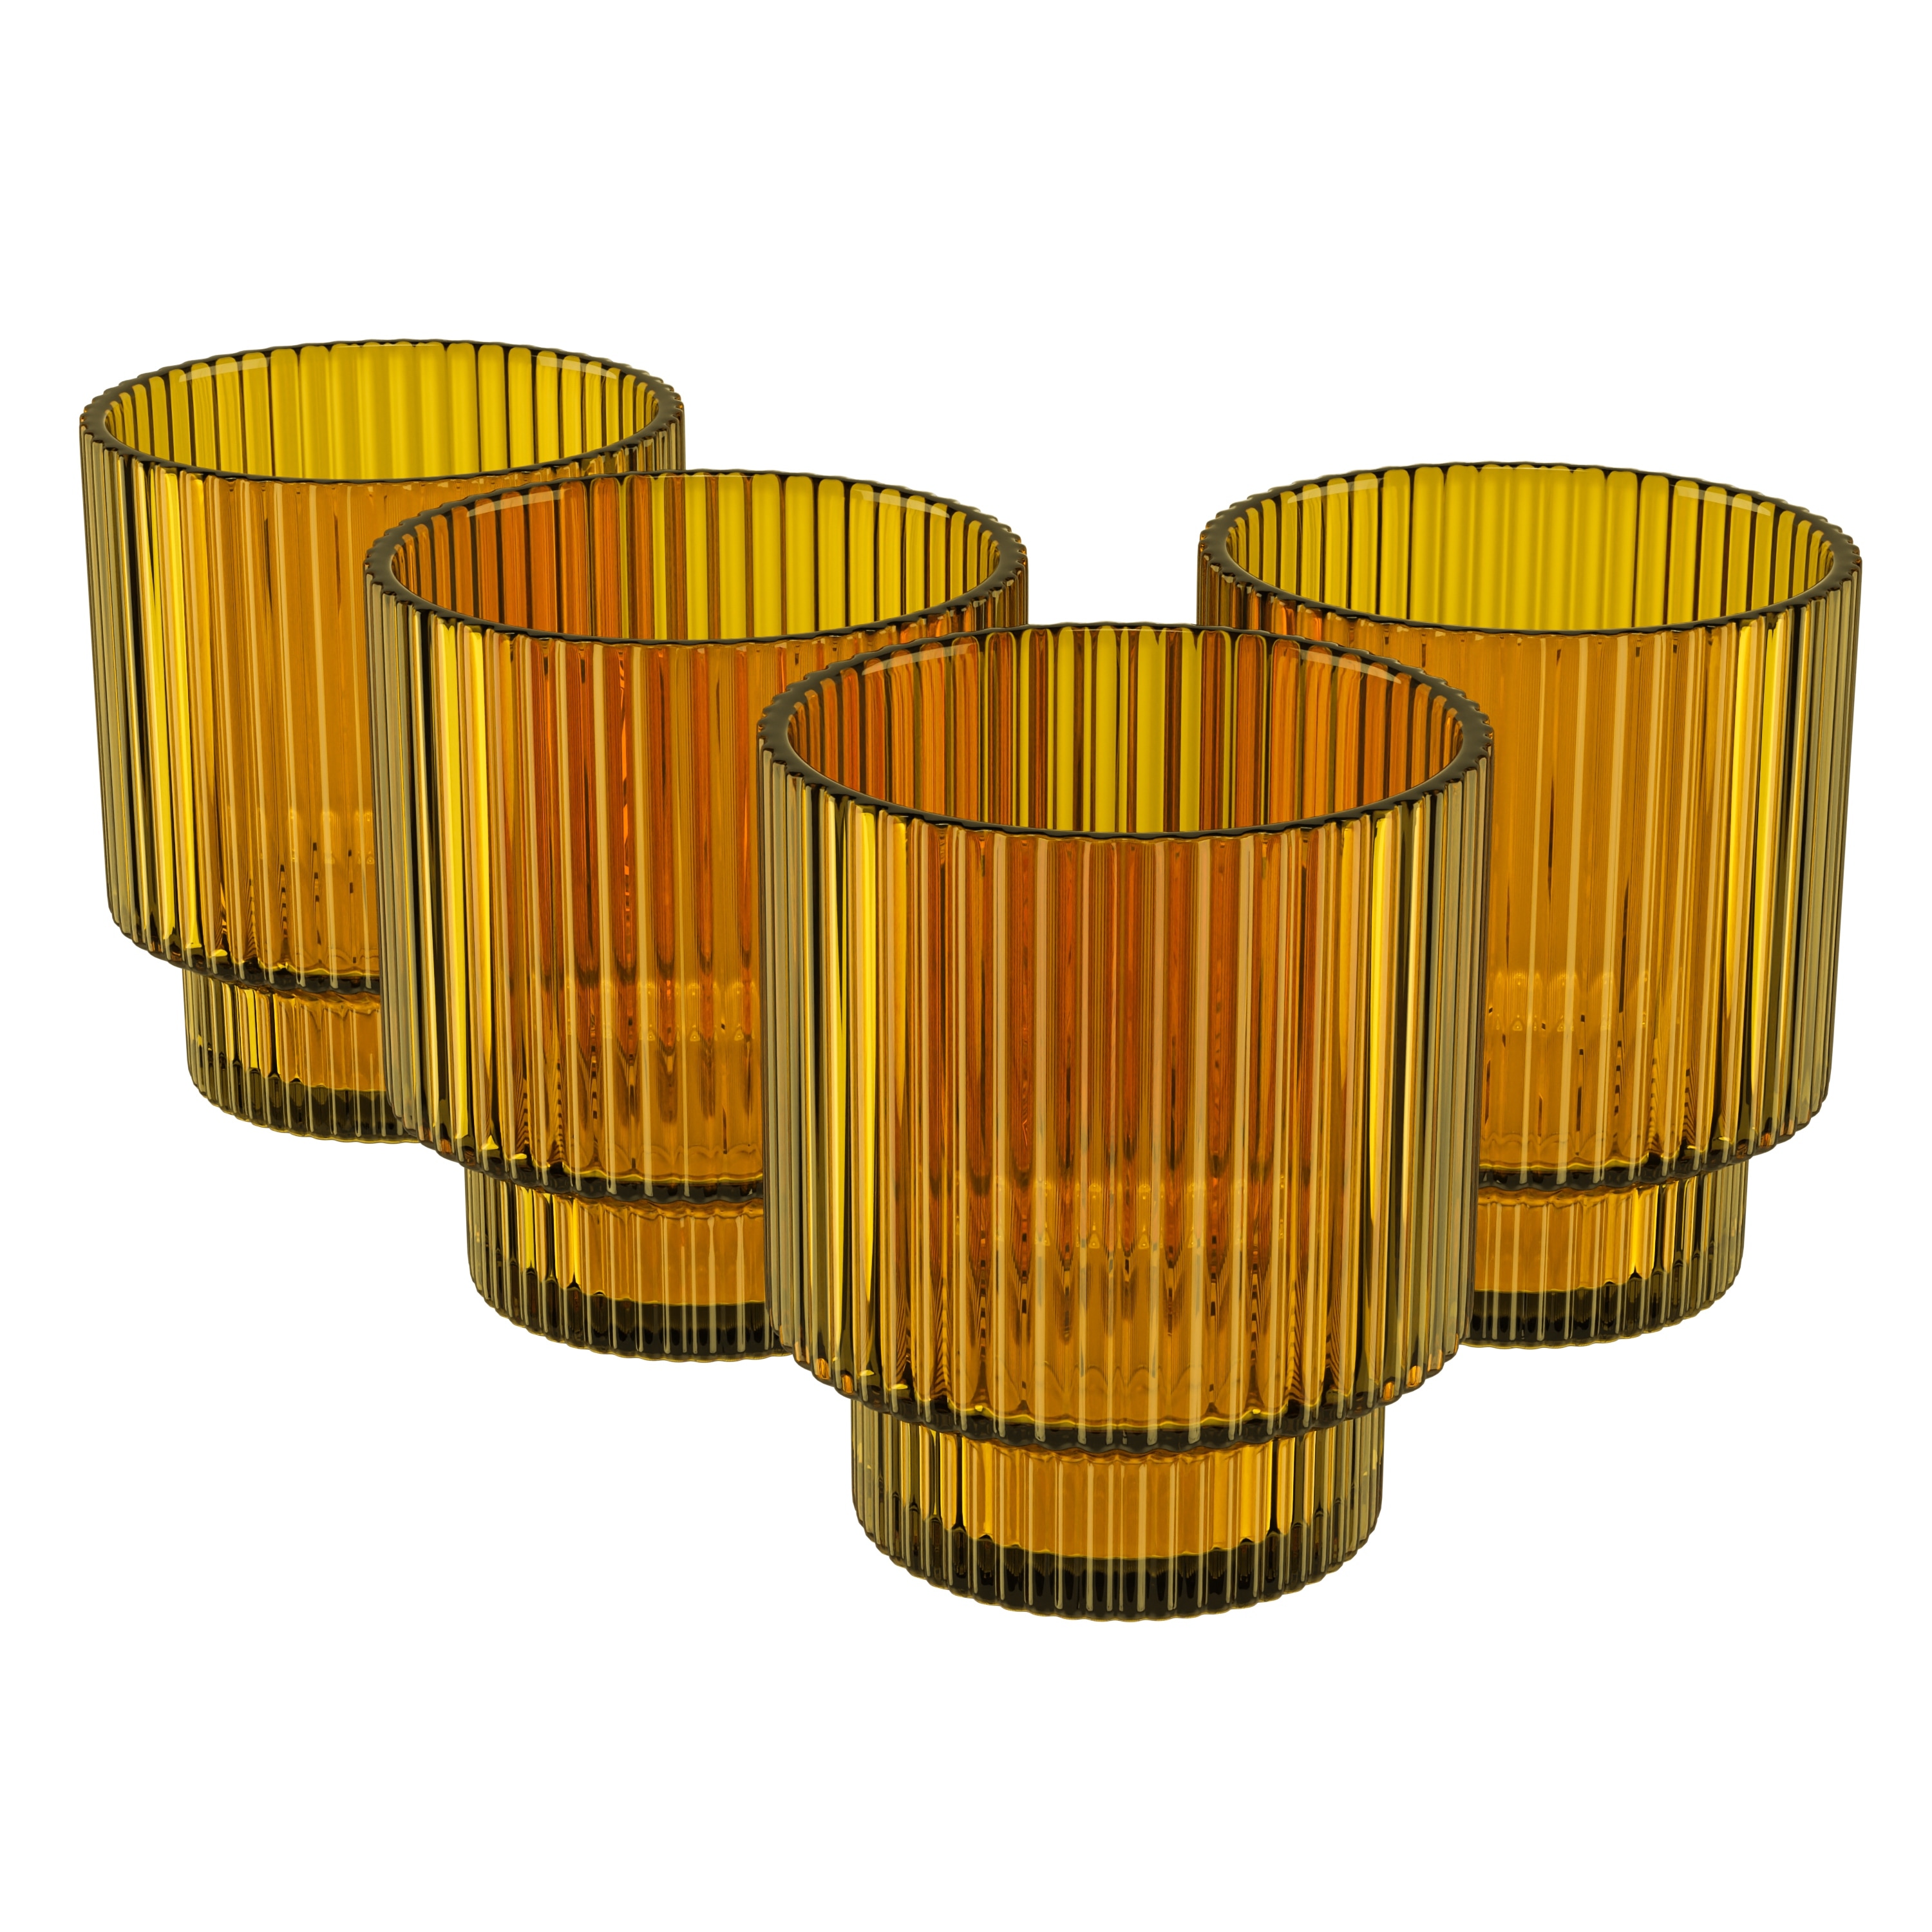 https://ak1.ostkcdn.com/images/products/is/images/direct/e3e8f9d0c1446b204f87fb109d6723827b417fc4/American-Atelier-Vintage-Art-Deco-Fluted-Drinking-Glasses-Set-of-4.jpg